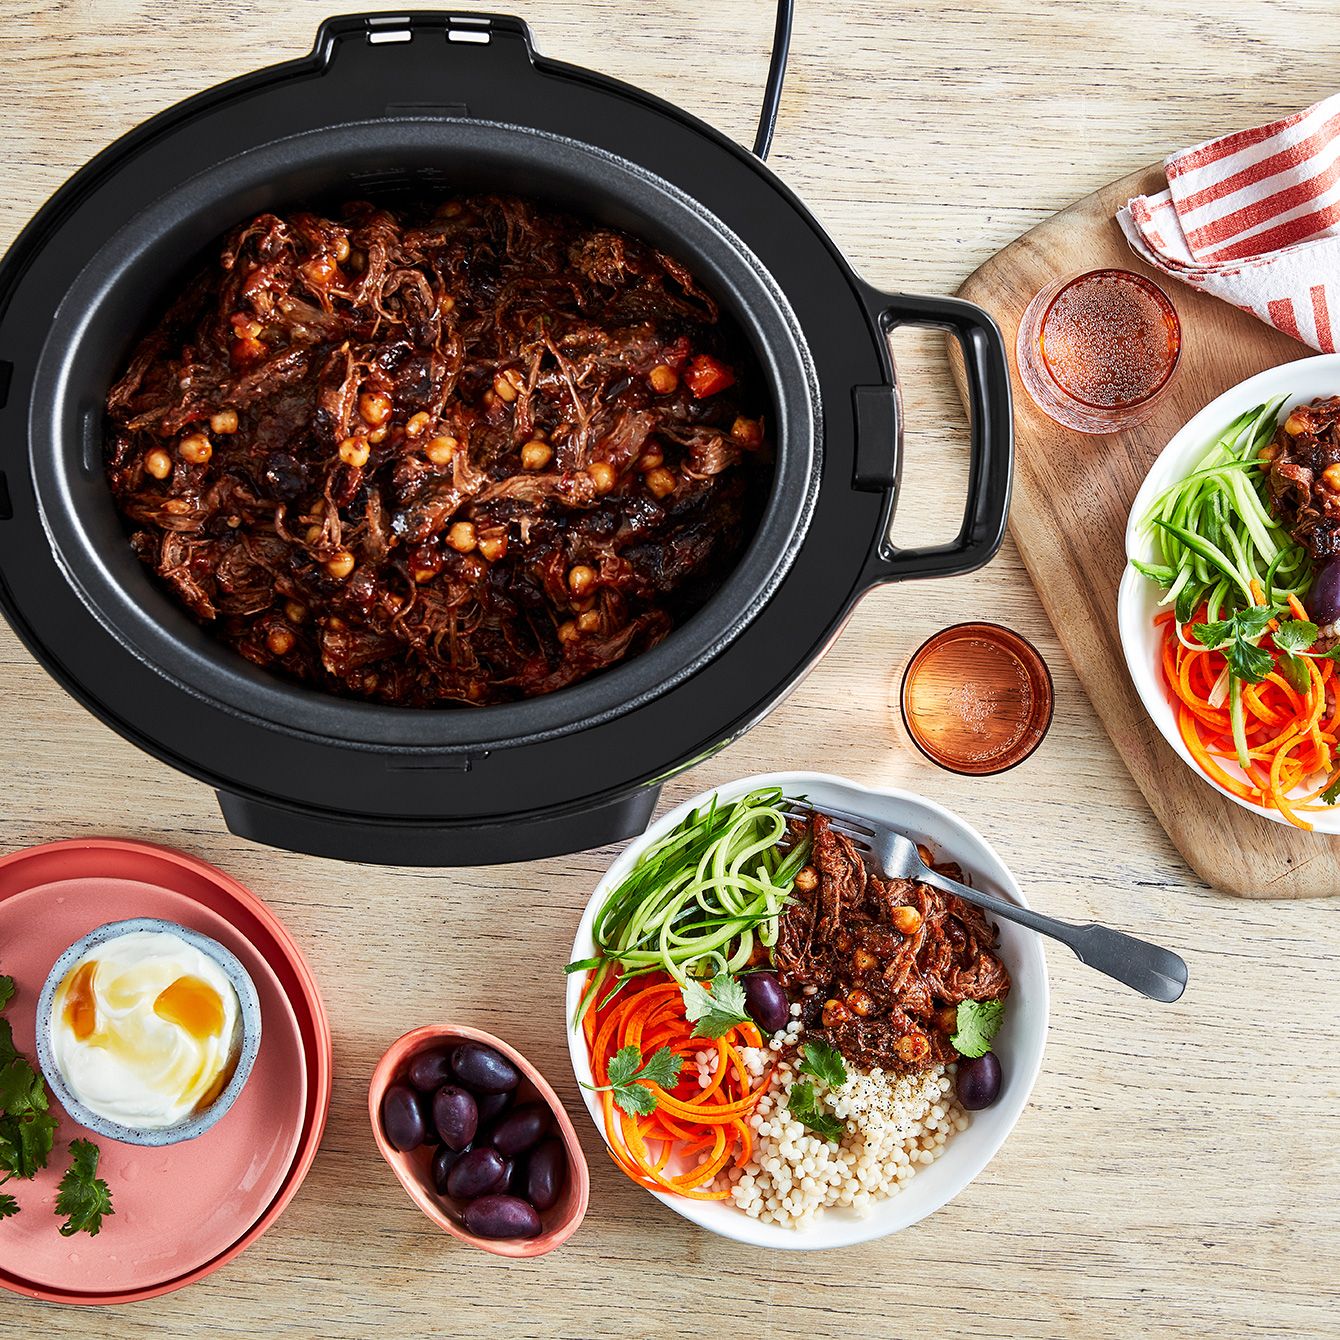 https://cdn.shopify.com/s/files/1/2250/9307/products/CPE_500_Crockpot_Express_Oval_Pressure_Multicooker_Morrocan_Spice_Poke_Bowl_Overhead_1340x1340_203abe18c1.jpg